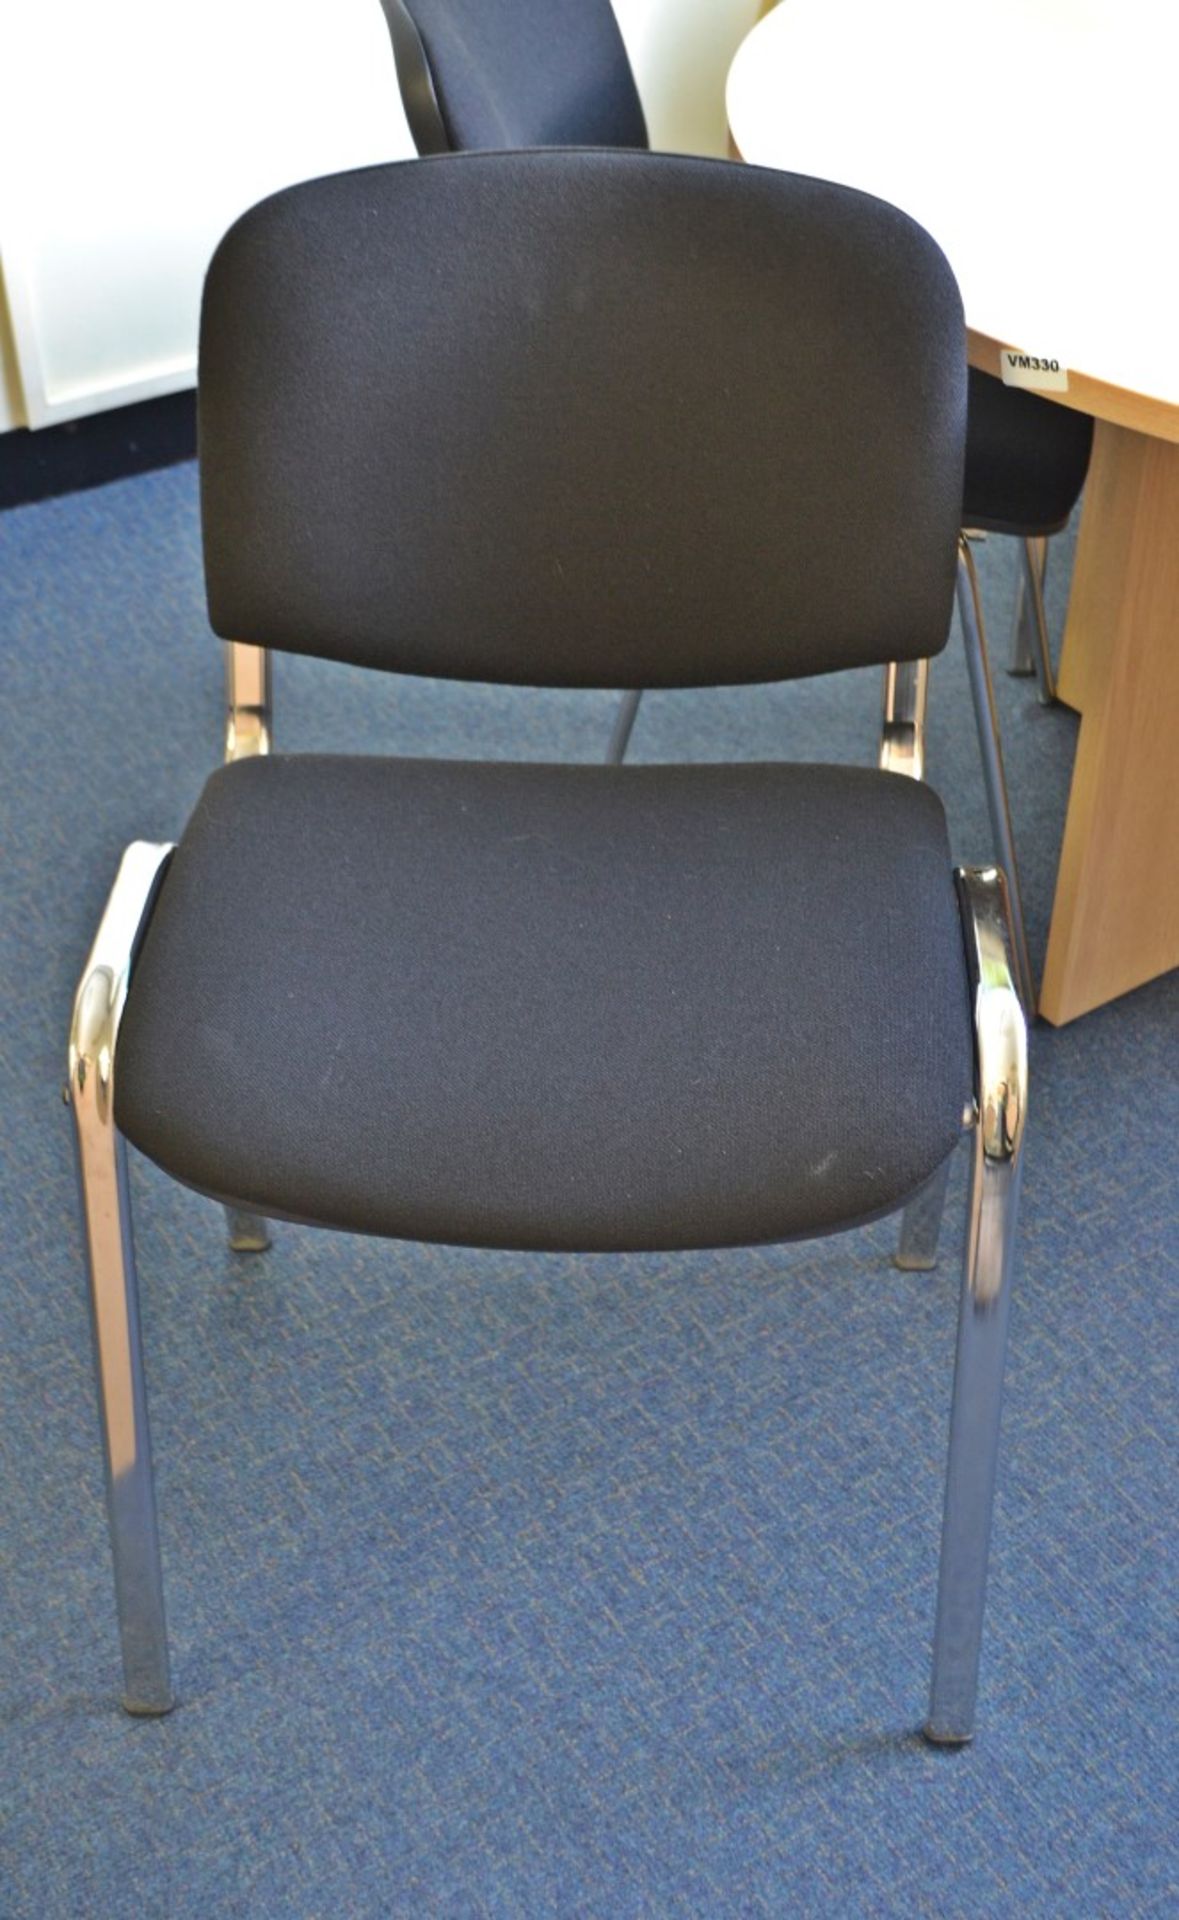 1 x Round Office Meeting Table With 4 Black Chairs - Ref: VM330 - CL409 - Location: Wakefield WF16 - Image 2 of 2